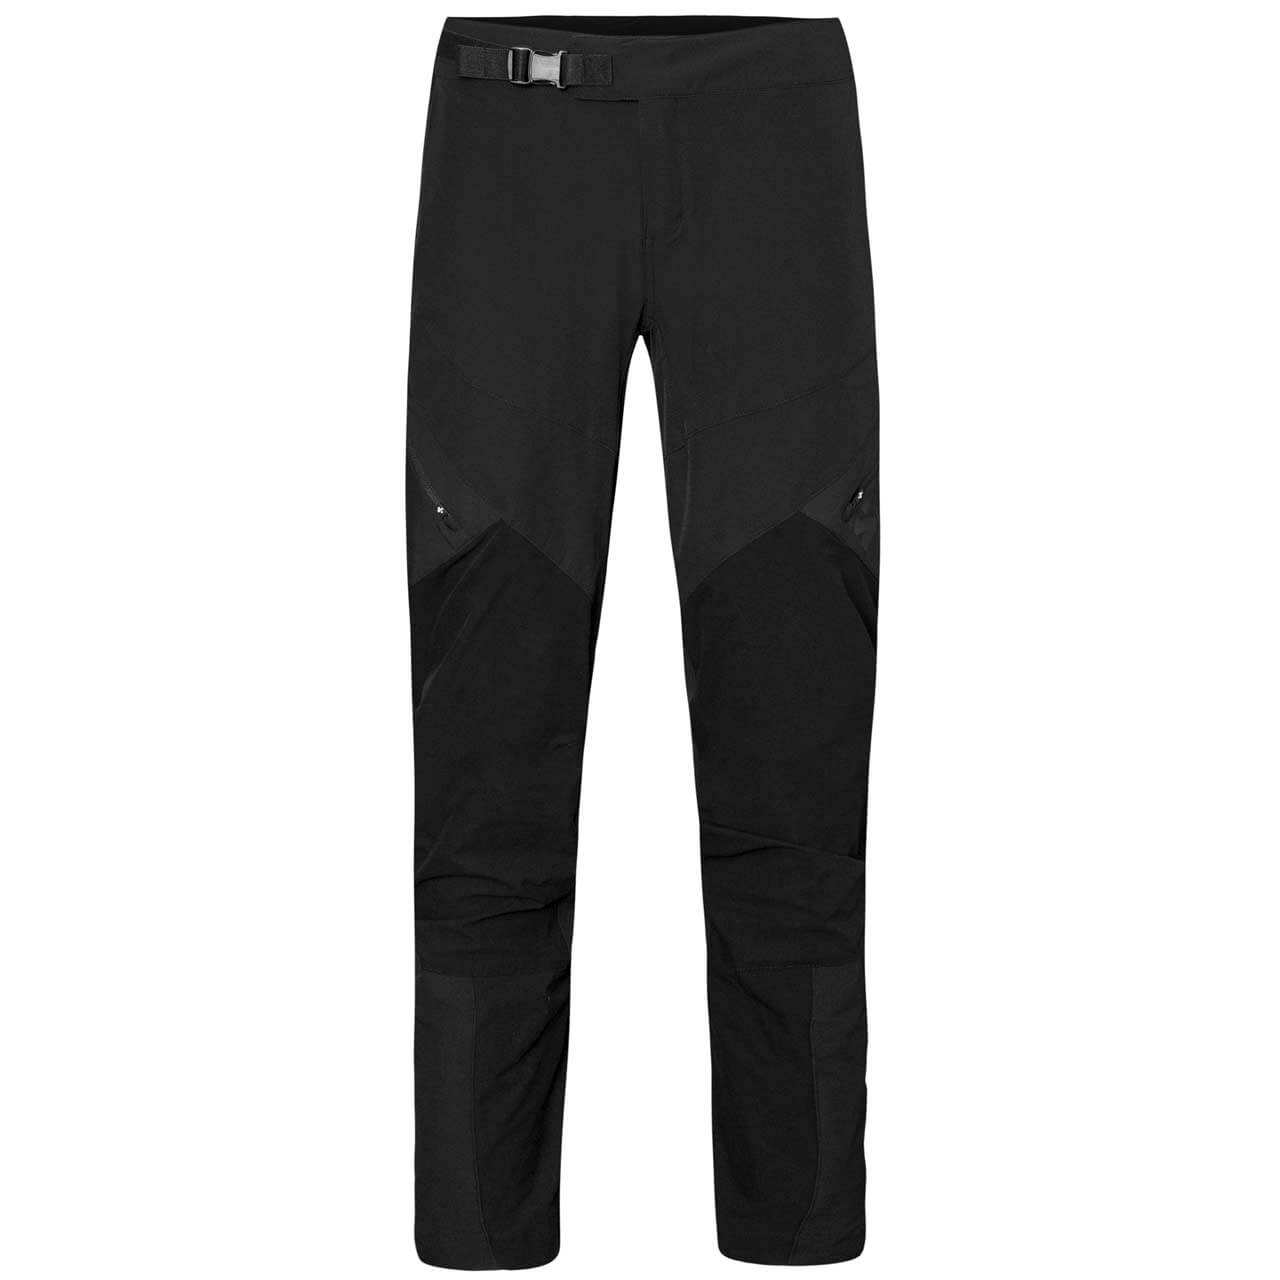 Sweet Protection Hunter Pants - Black, XL von Sweet Protection}